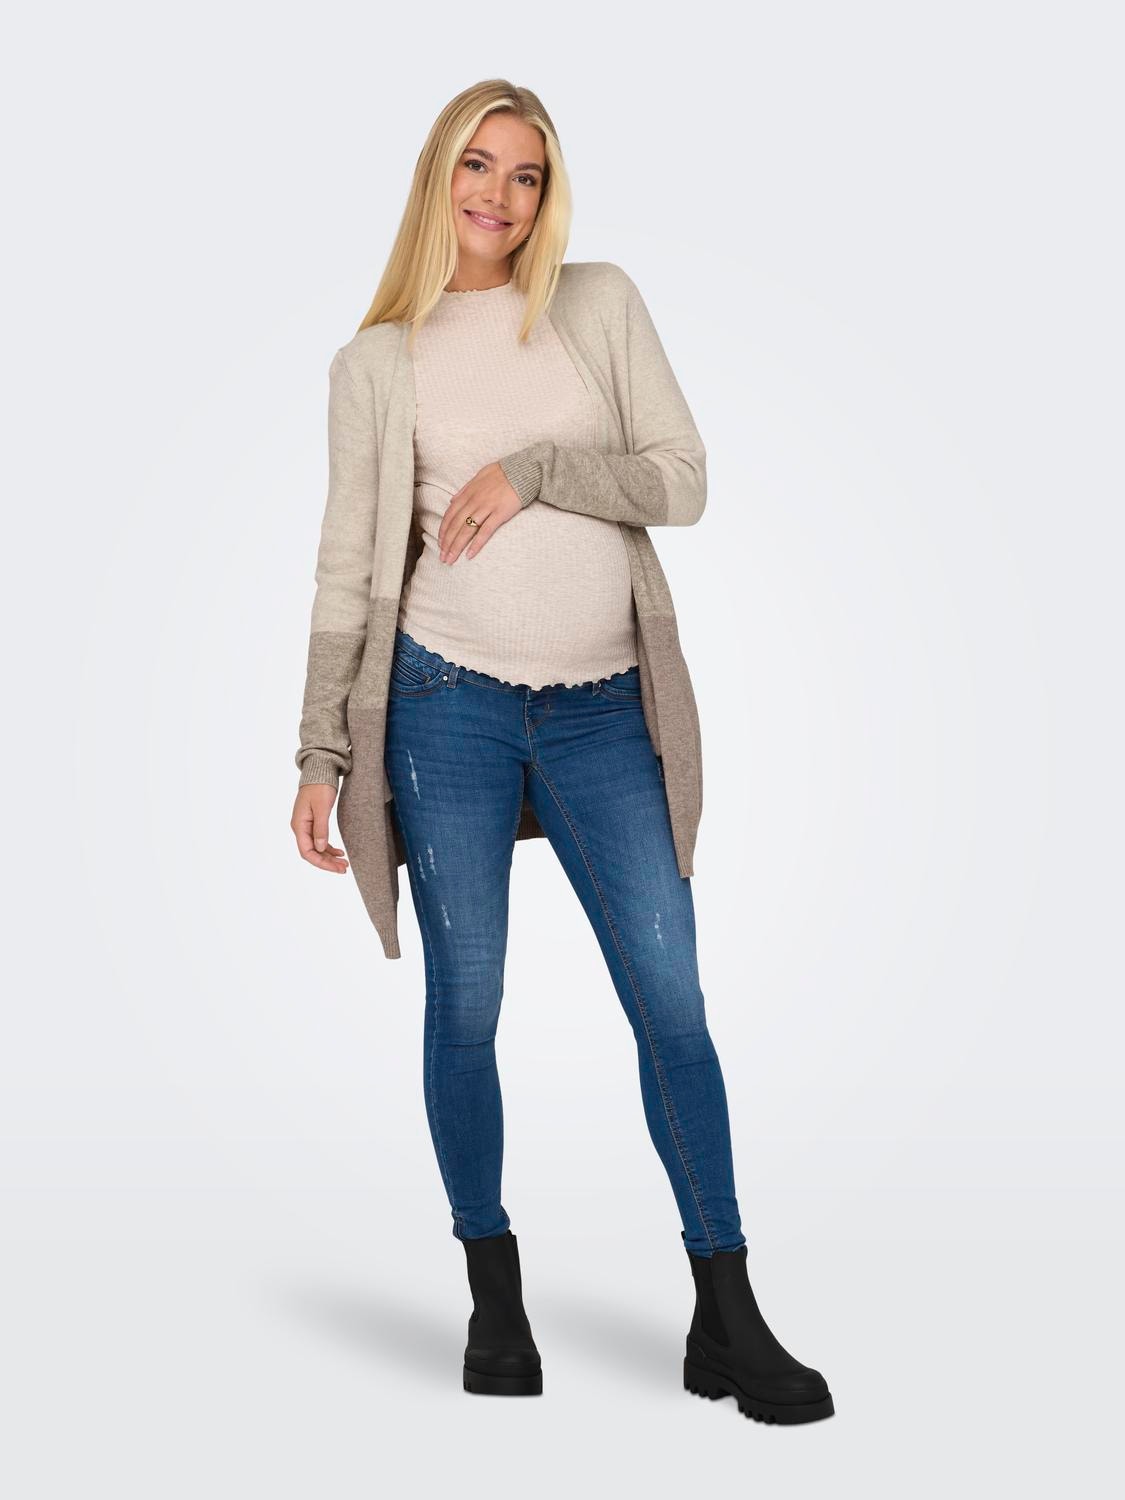 ONLY Mama Long Belt Knitted Cardigan -Sand - 15277707